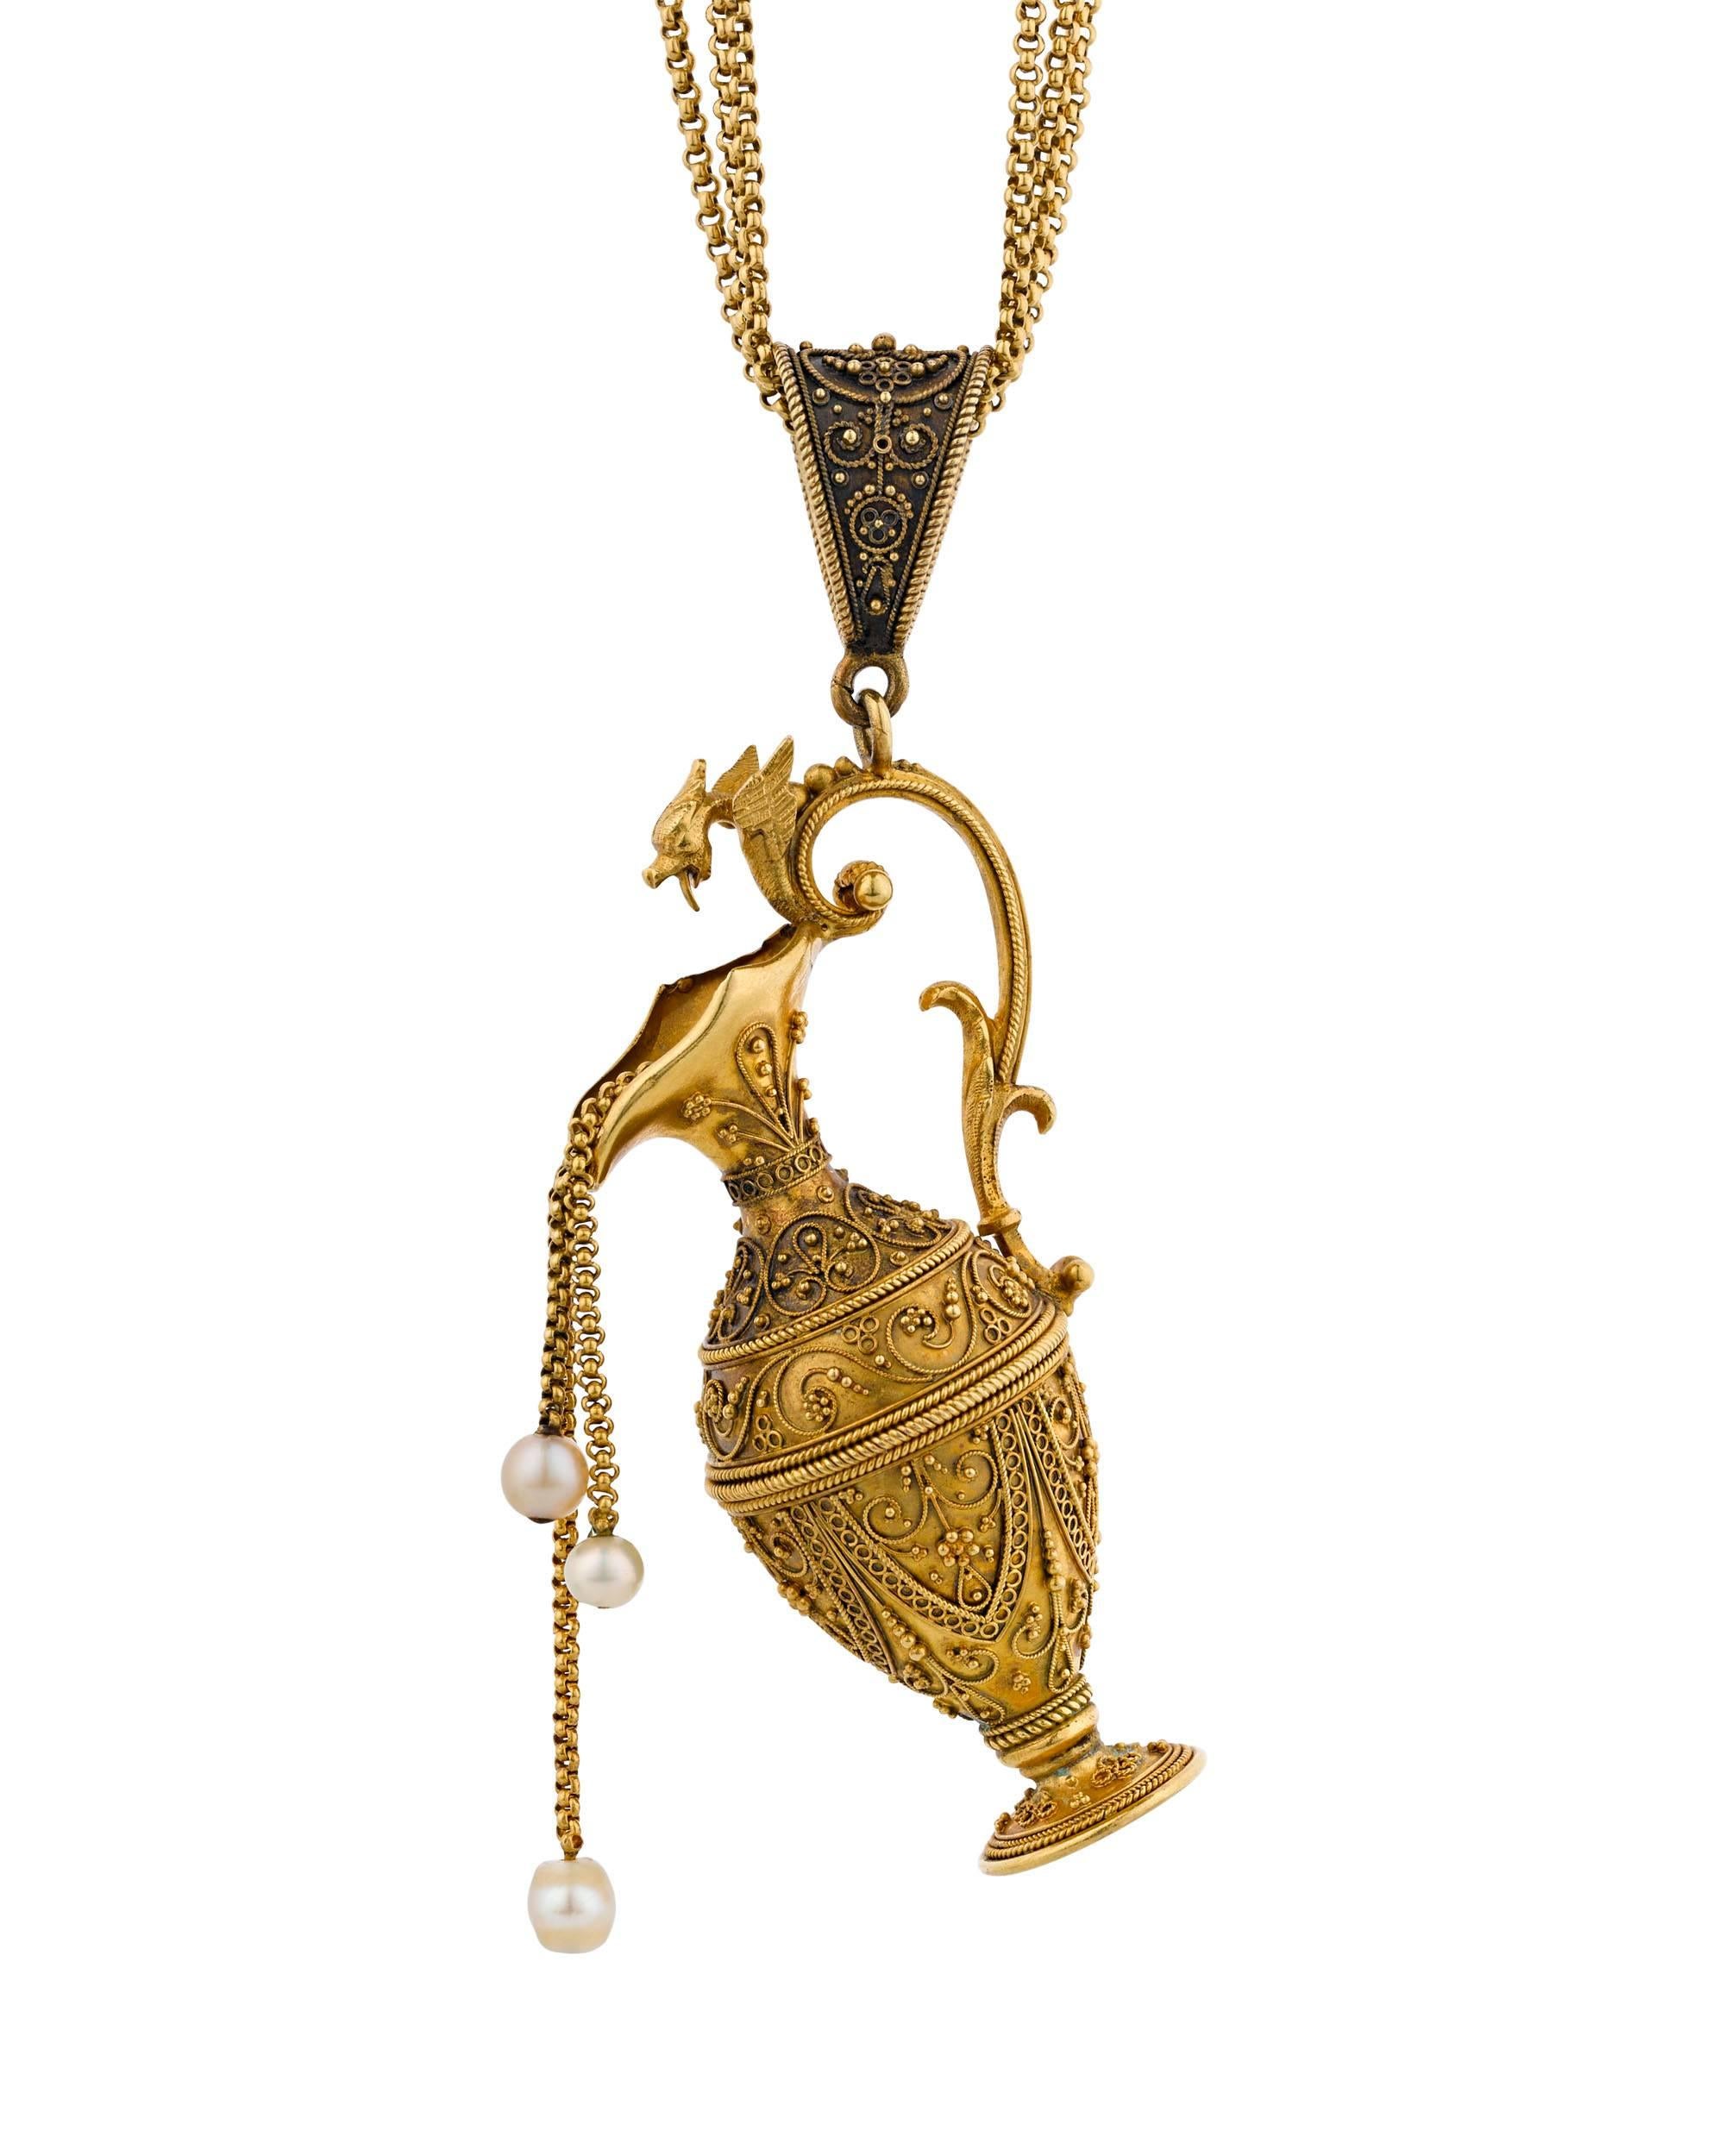 This extraordinary Victorian pendant necklace is an elegant and dramatic example of the Etruscan Revival style. The exquisite 21-22k gold pendant takes the shape of a neoclassical ewer, which has been decorated through an ancient process known as